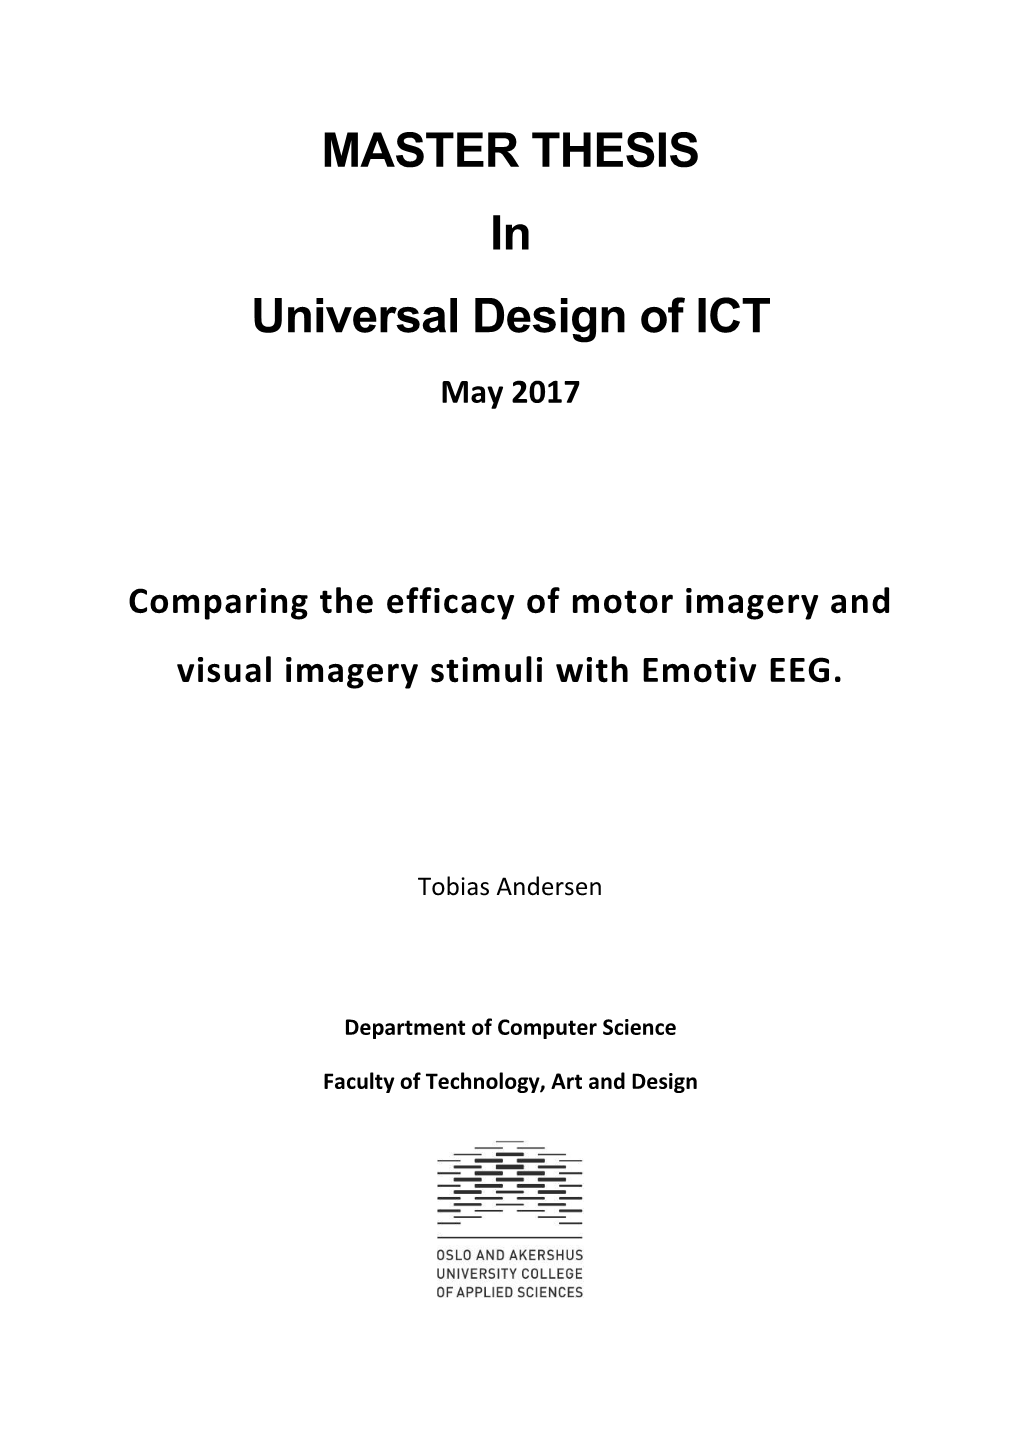 MASTER THESIS in Universal Design of ICT May 2017